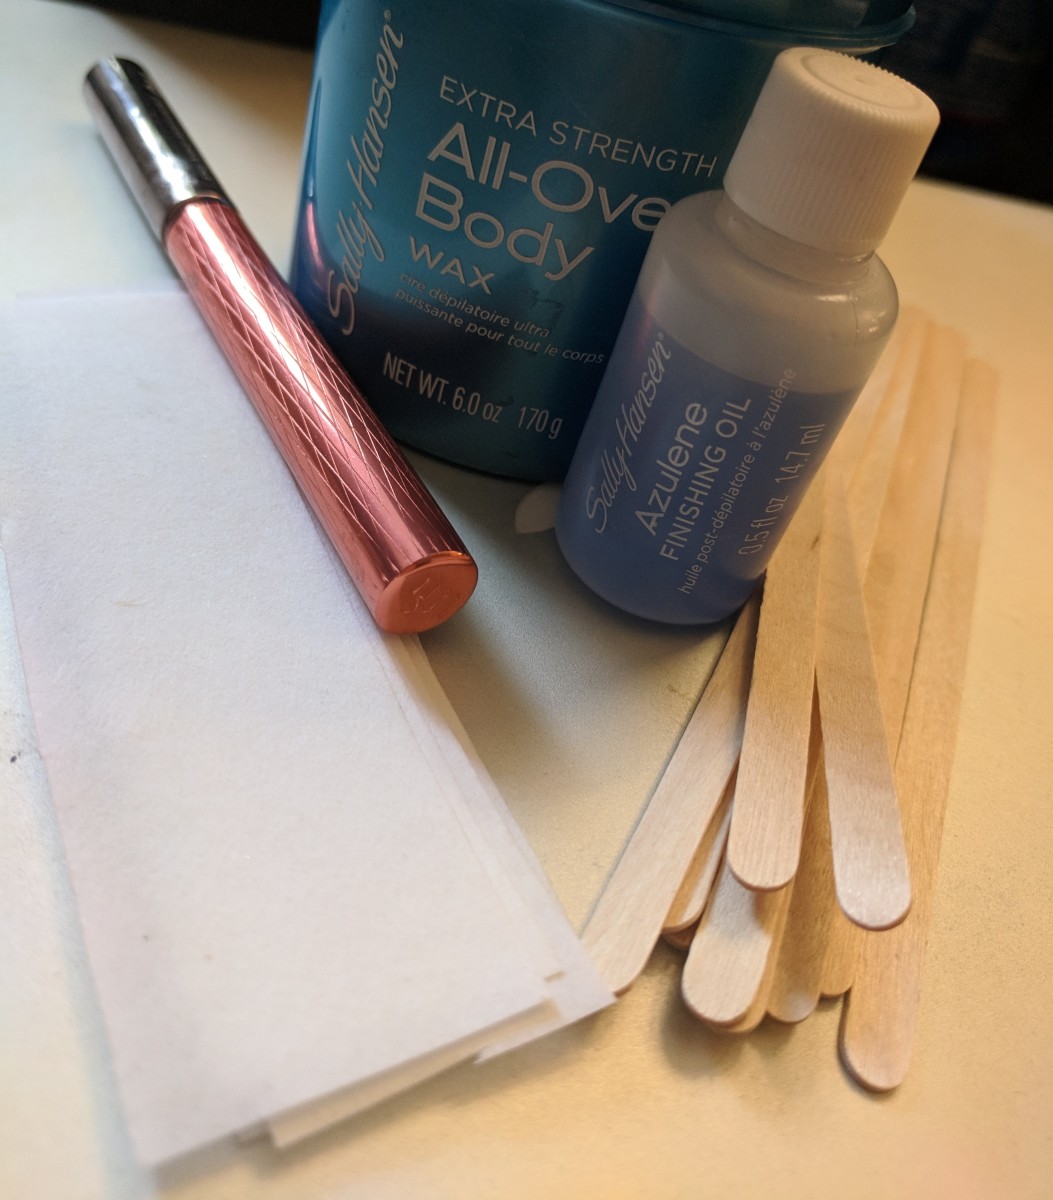 Here are all of the supplies I used, minus the brow gel and scissors!